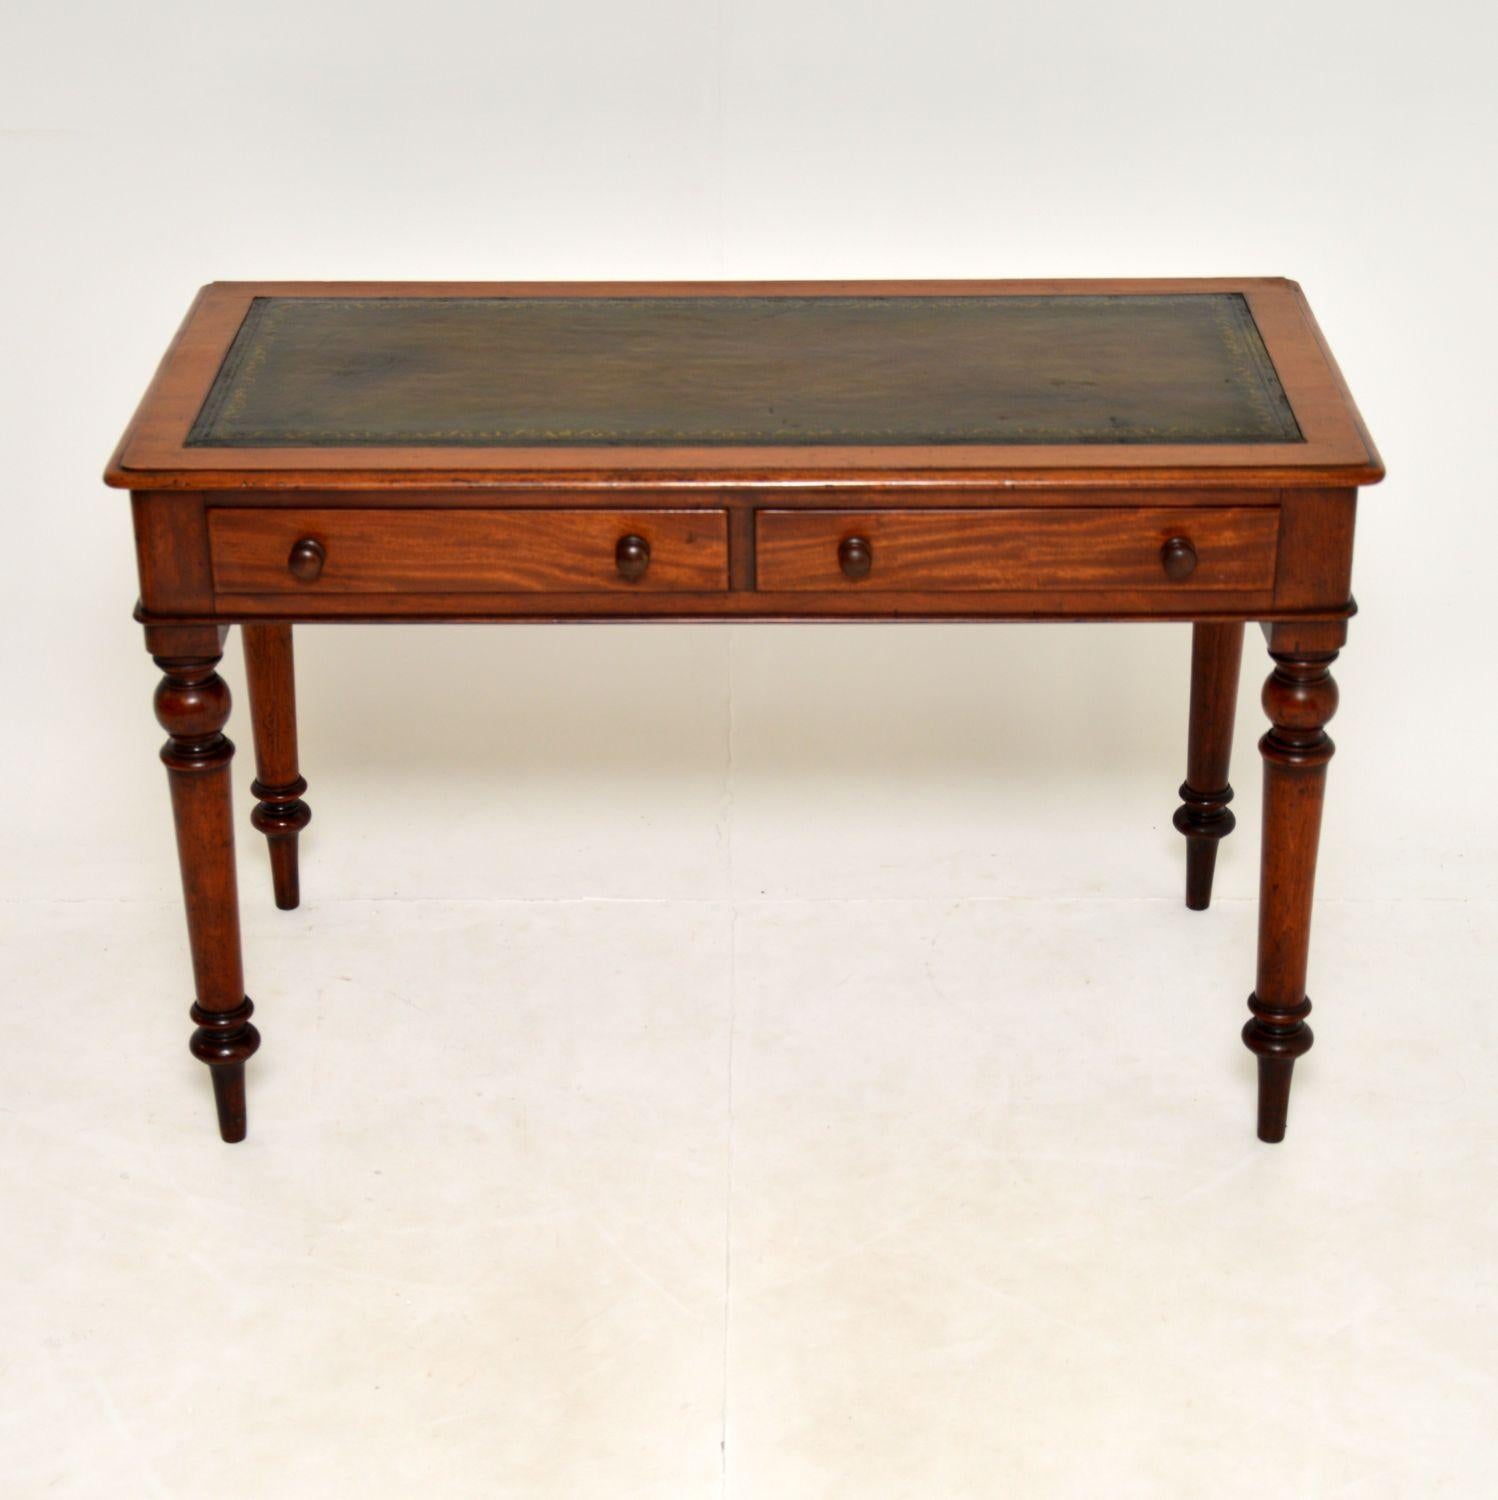 A top quality antique Victorian writing table in mahogany, with a leather writing surface. This dates from around the 1860-1880 period.

This desk is a good size, very sturdy & is extremely well made, with panelled sides, beautifully turned legs